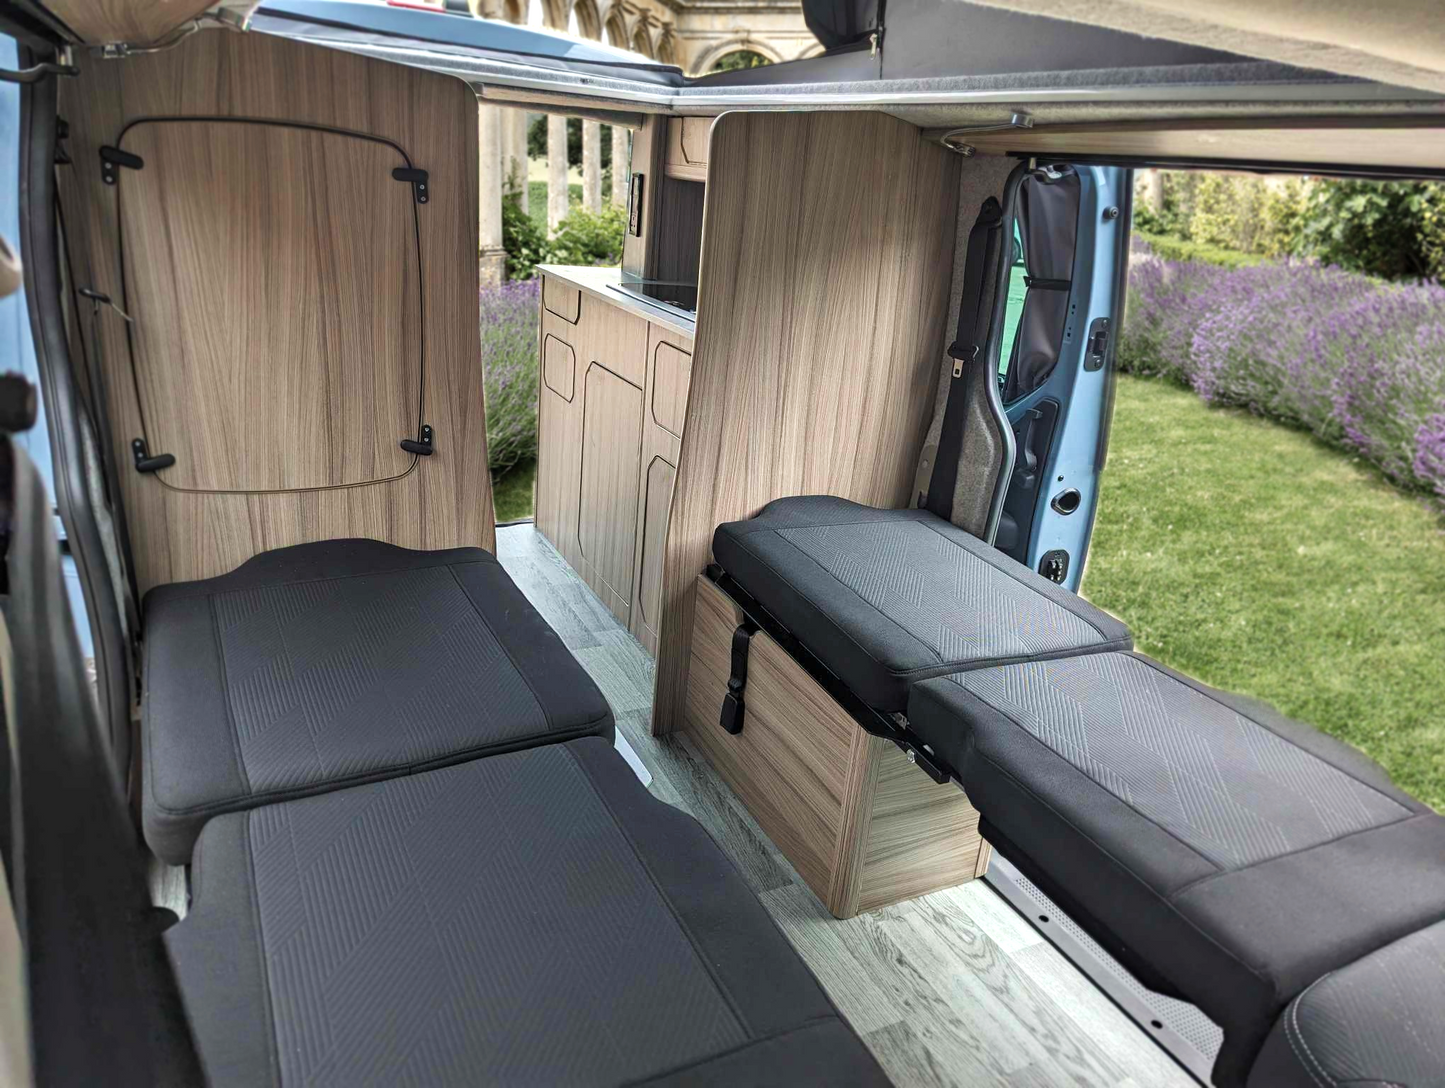 The Witley Camper Van Conversion for the Vauxhall Vivaro, Renault Trafic, Nissan NV300 Fiat Talento with up to  six 6 traveling seat camper